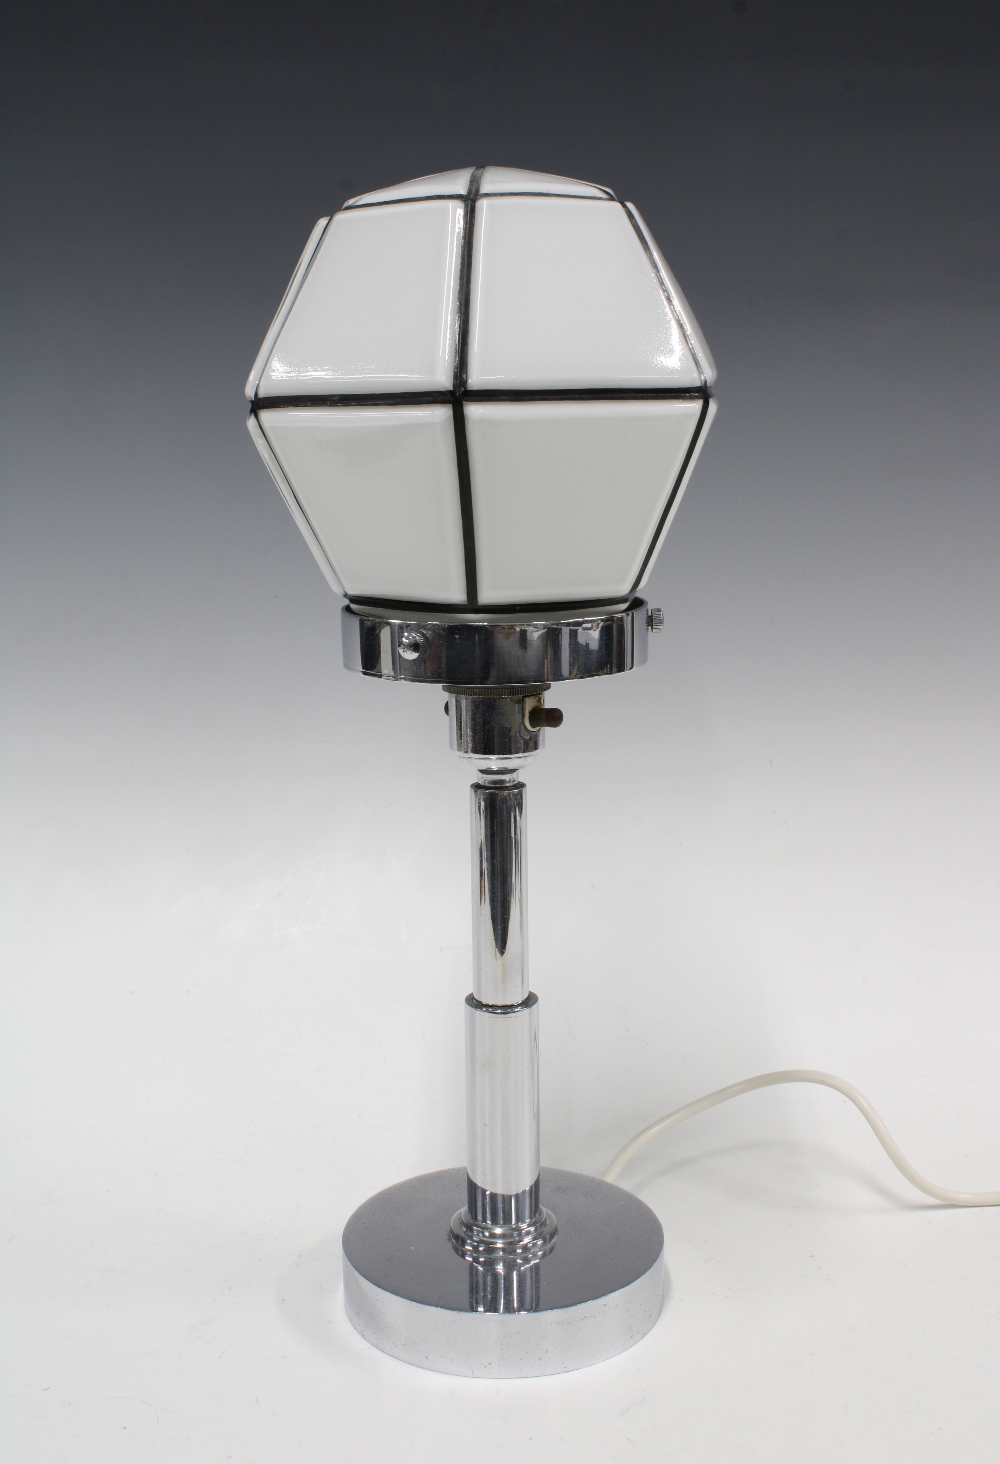 Art Deco chrome table lamp with an hexagonal white and black glass shade, 38cm including shade